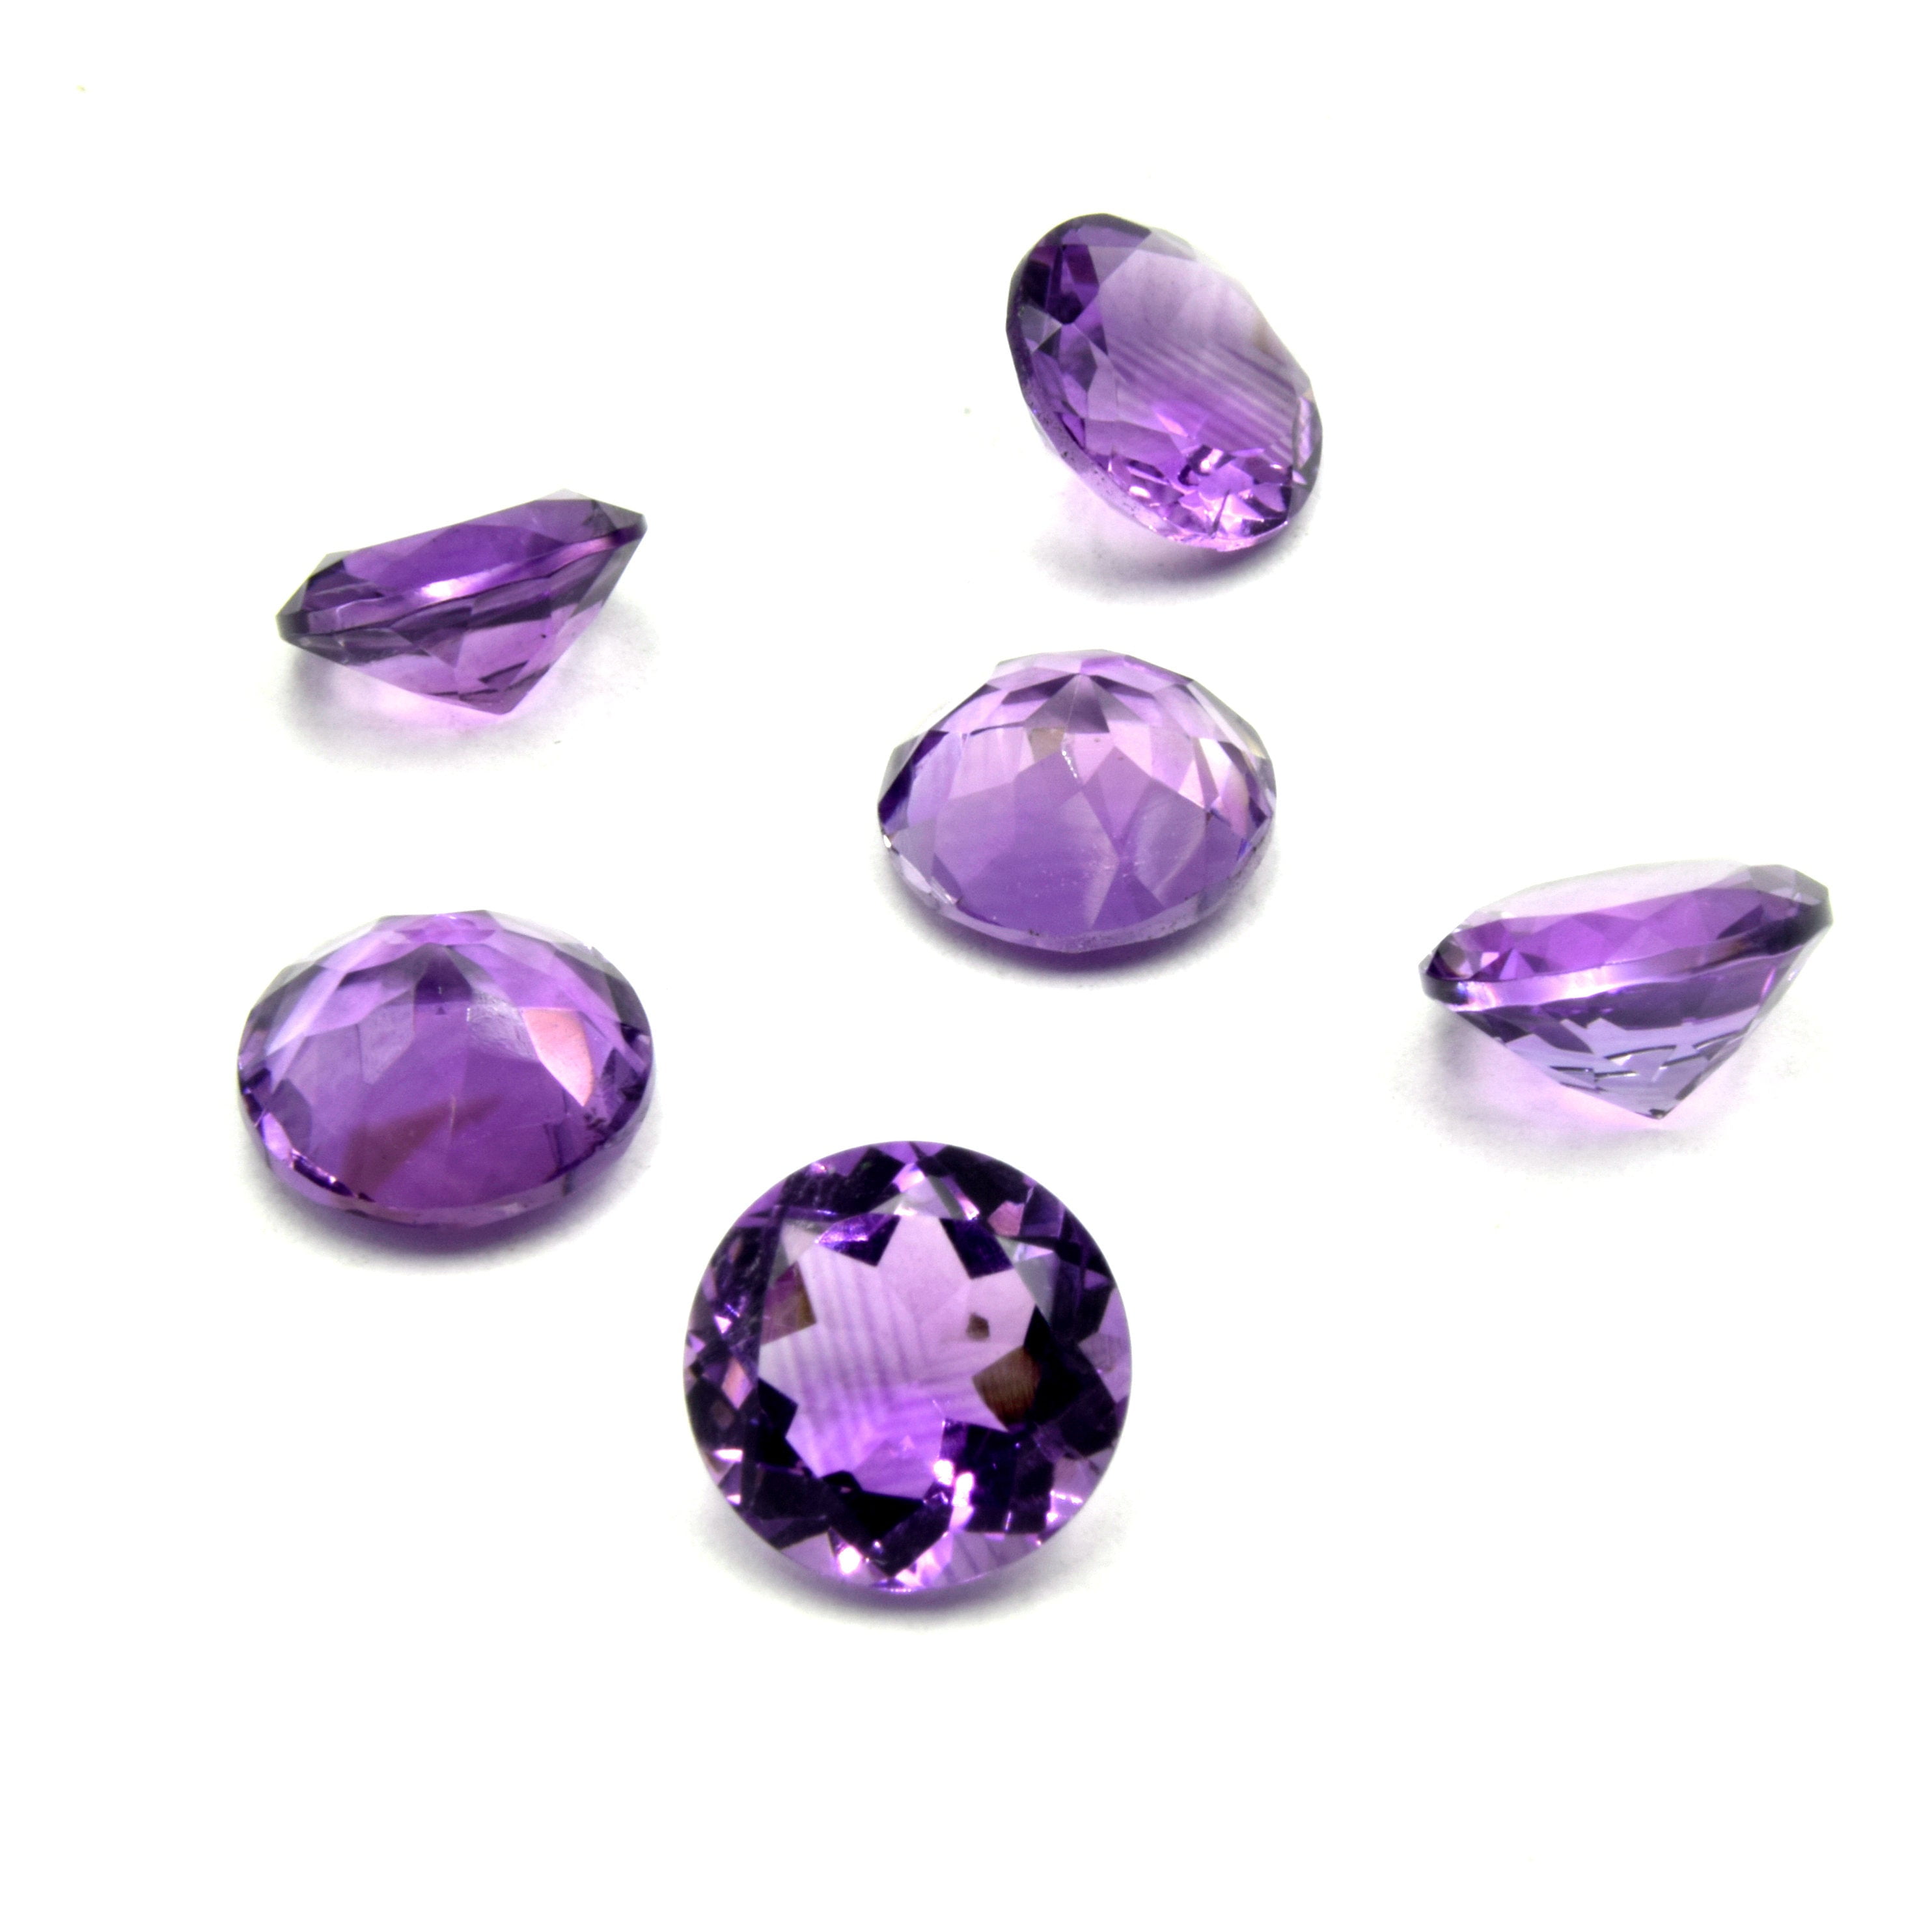 round faceted cut Amethyst loose gemstone various sizes